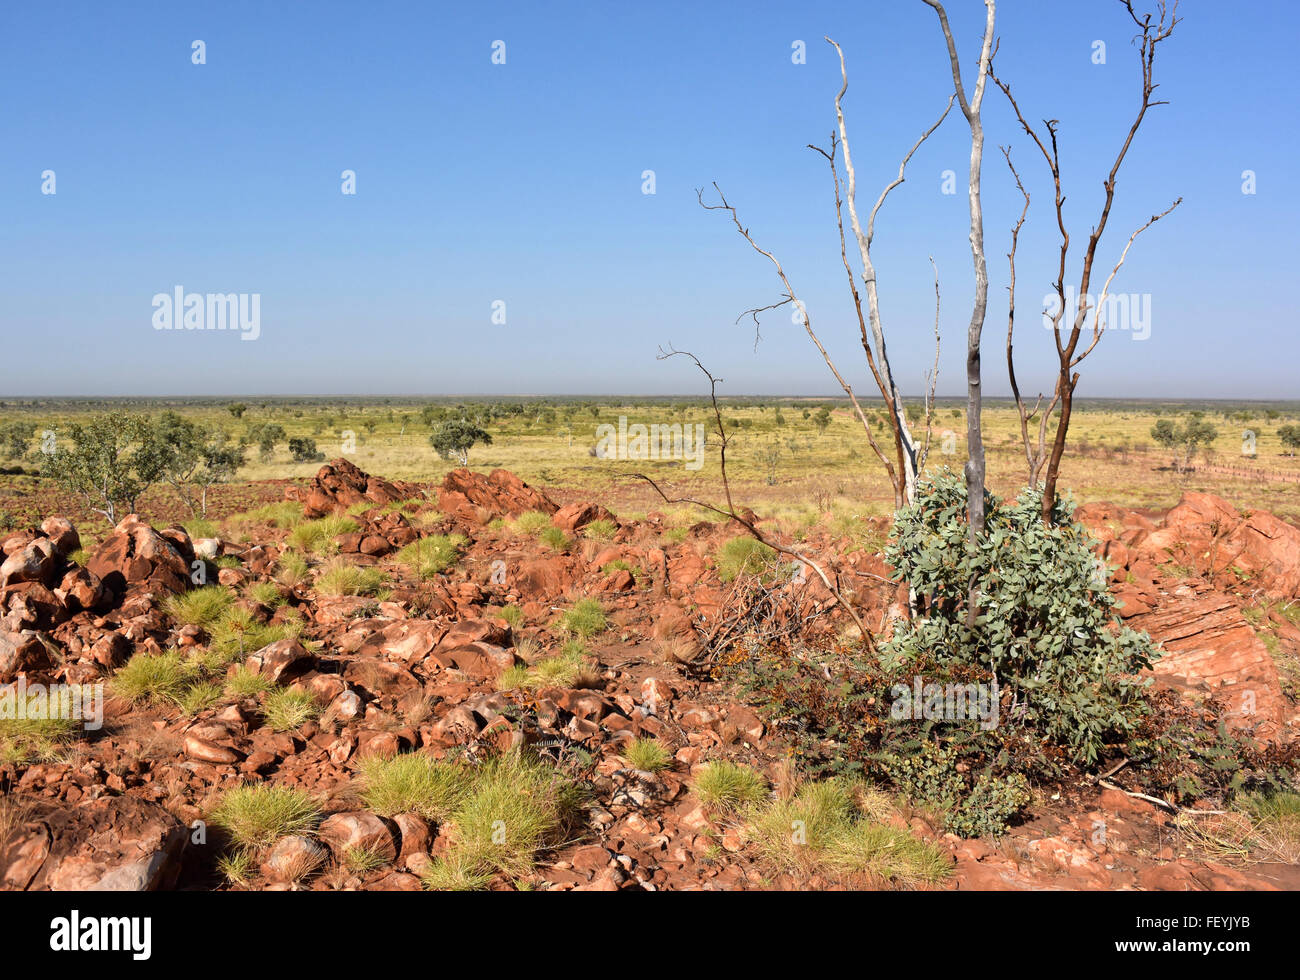 Known in inland Australia as spinifex, small clumps of Triordia sp. cling to the rocky red landscape at Balgo, Western Australia Stock Photo